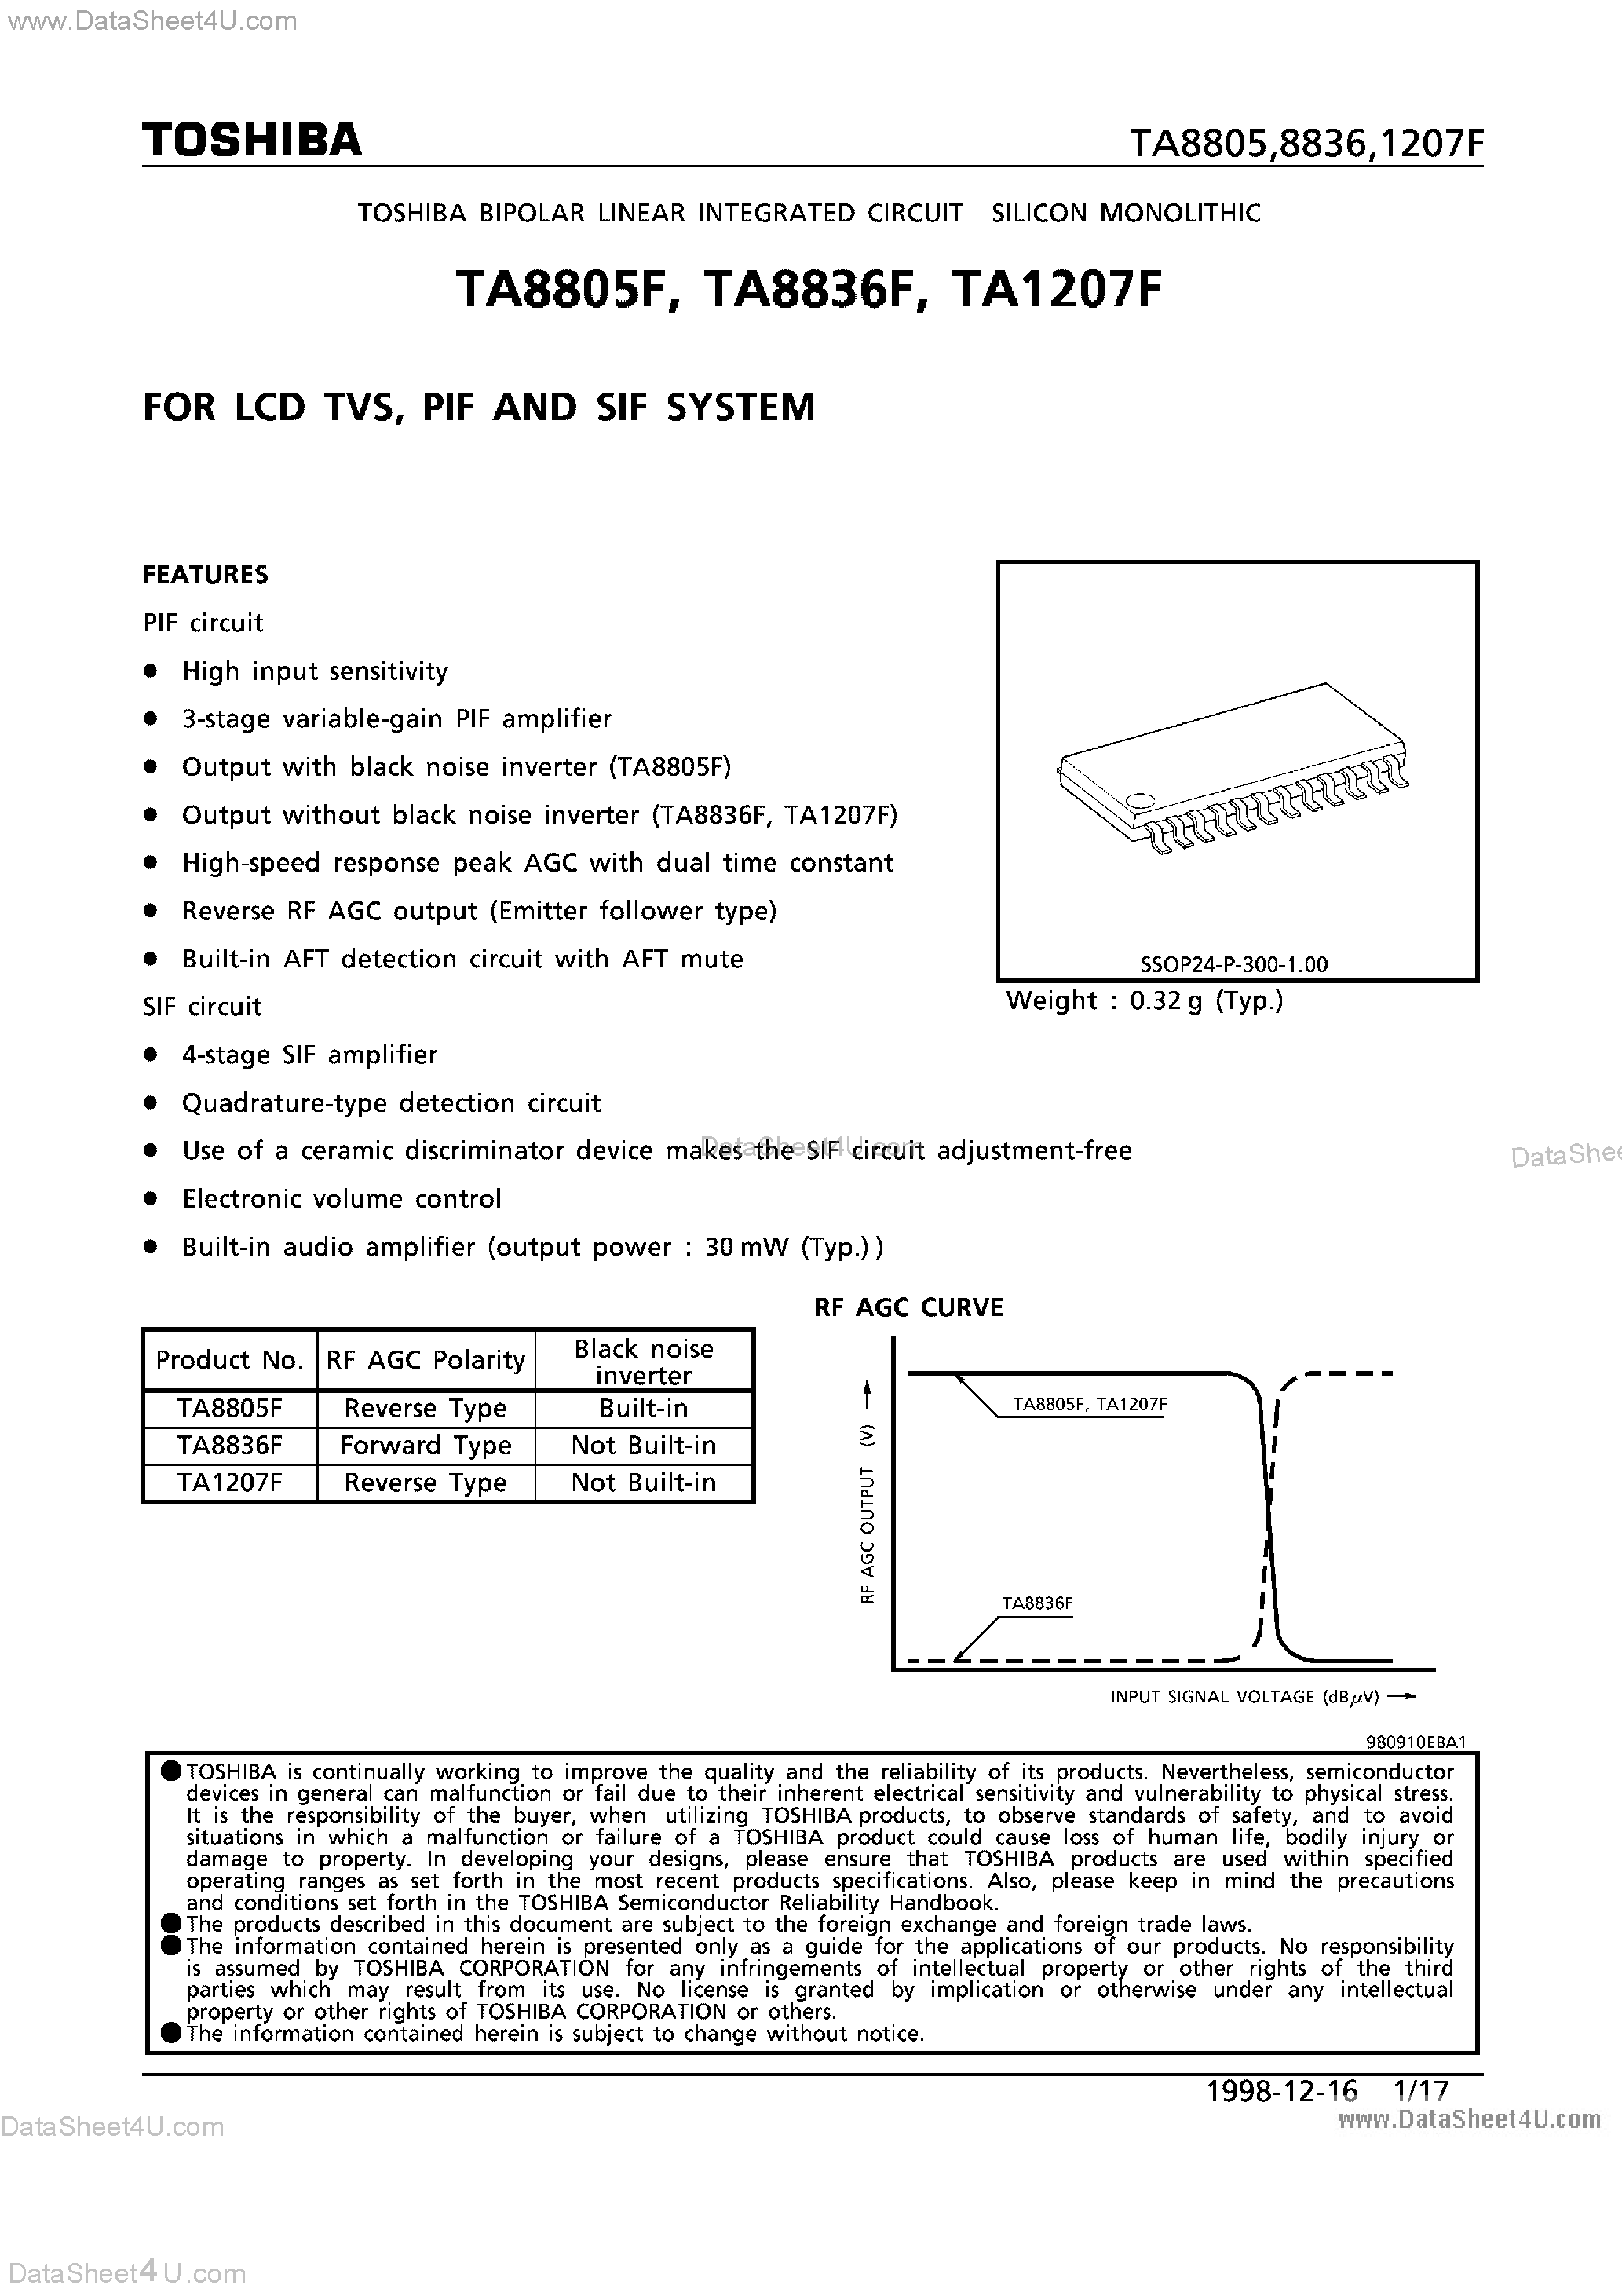 Datasheet TA1207F - FOR LCD TVS / PIF AND SIF SYSTEM page 1